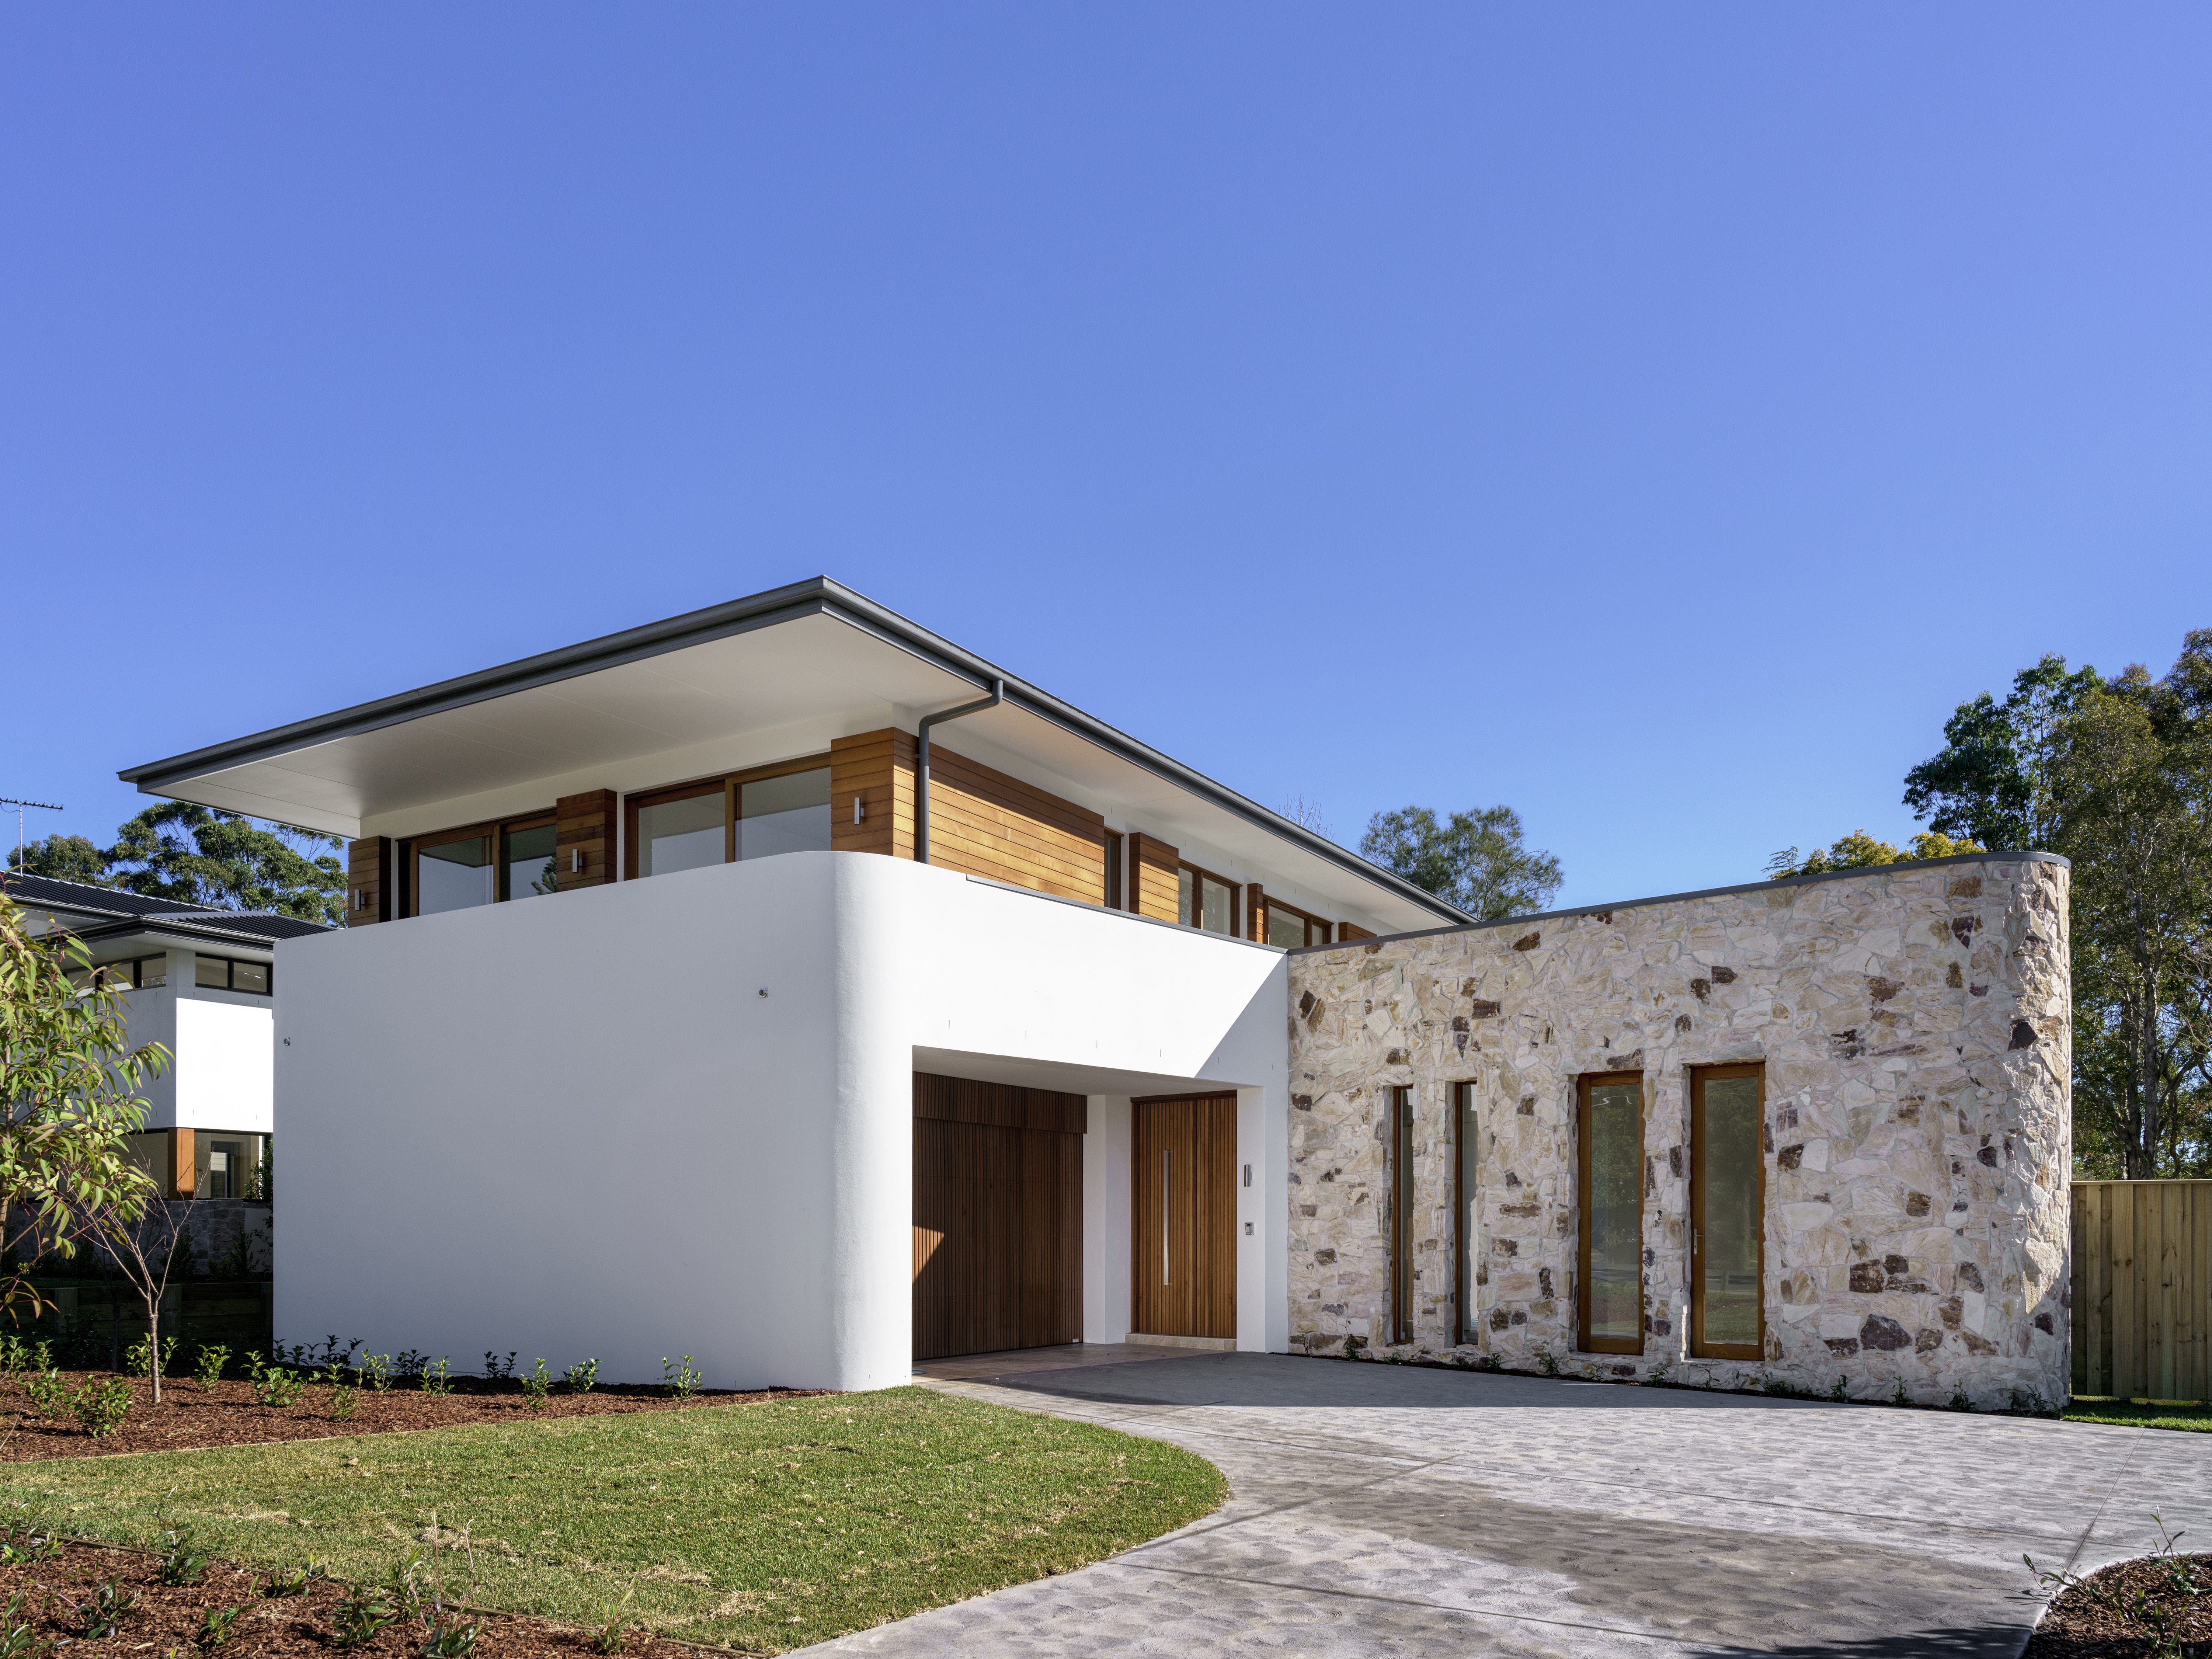 SOLD OUT - Glengarry Turramurra